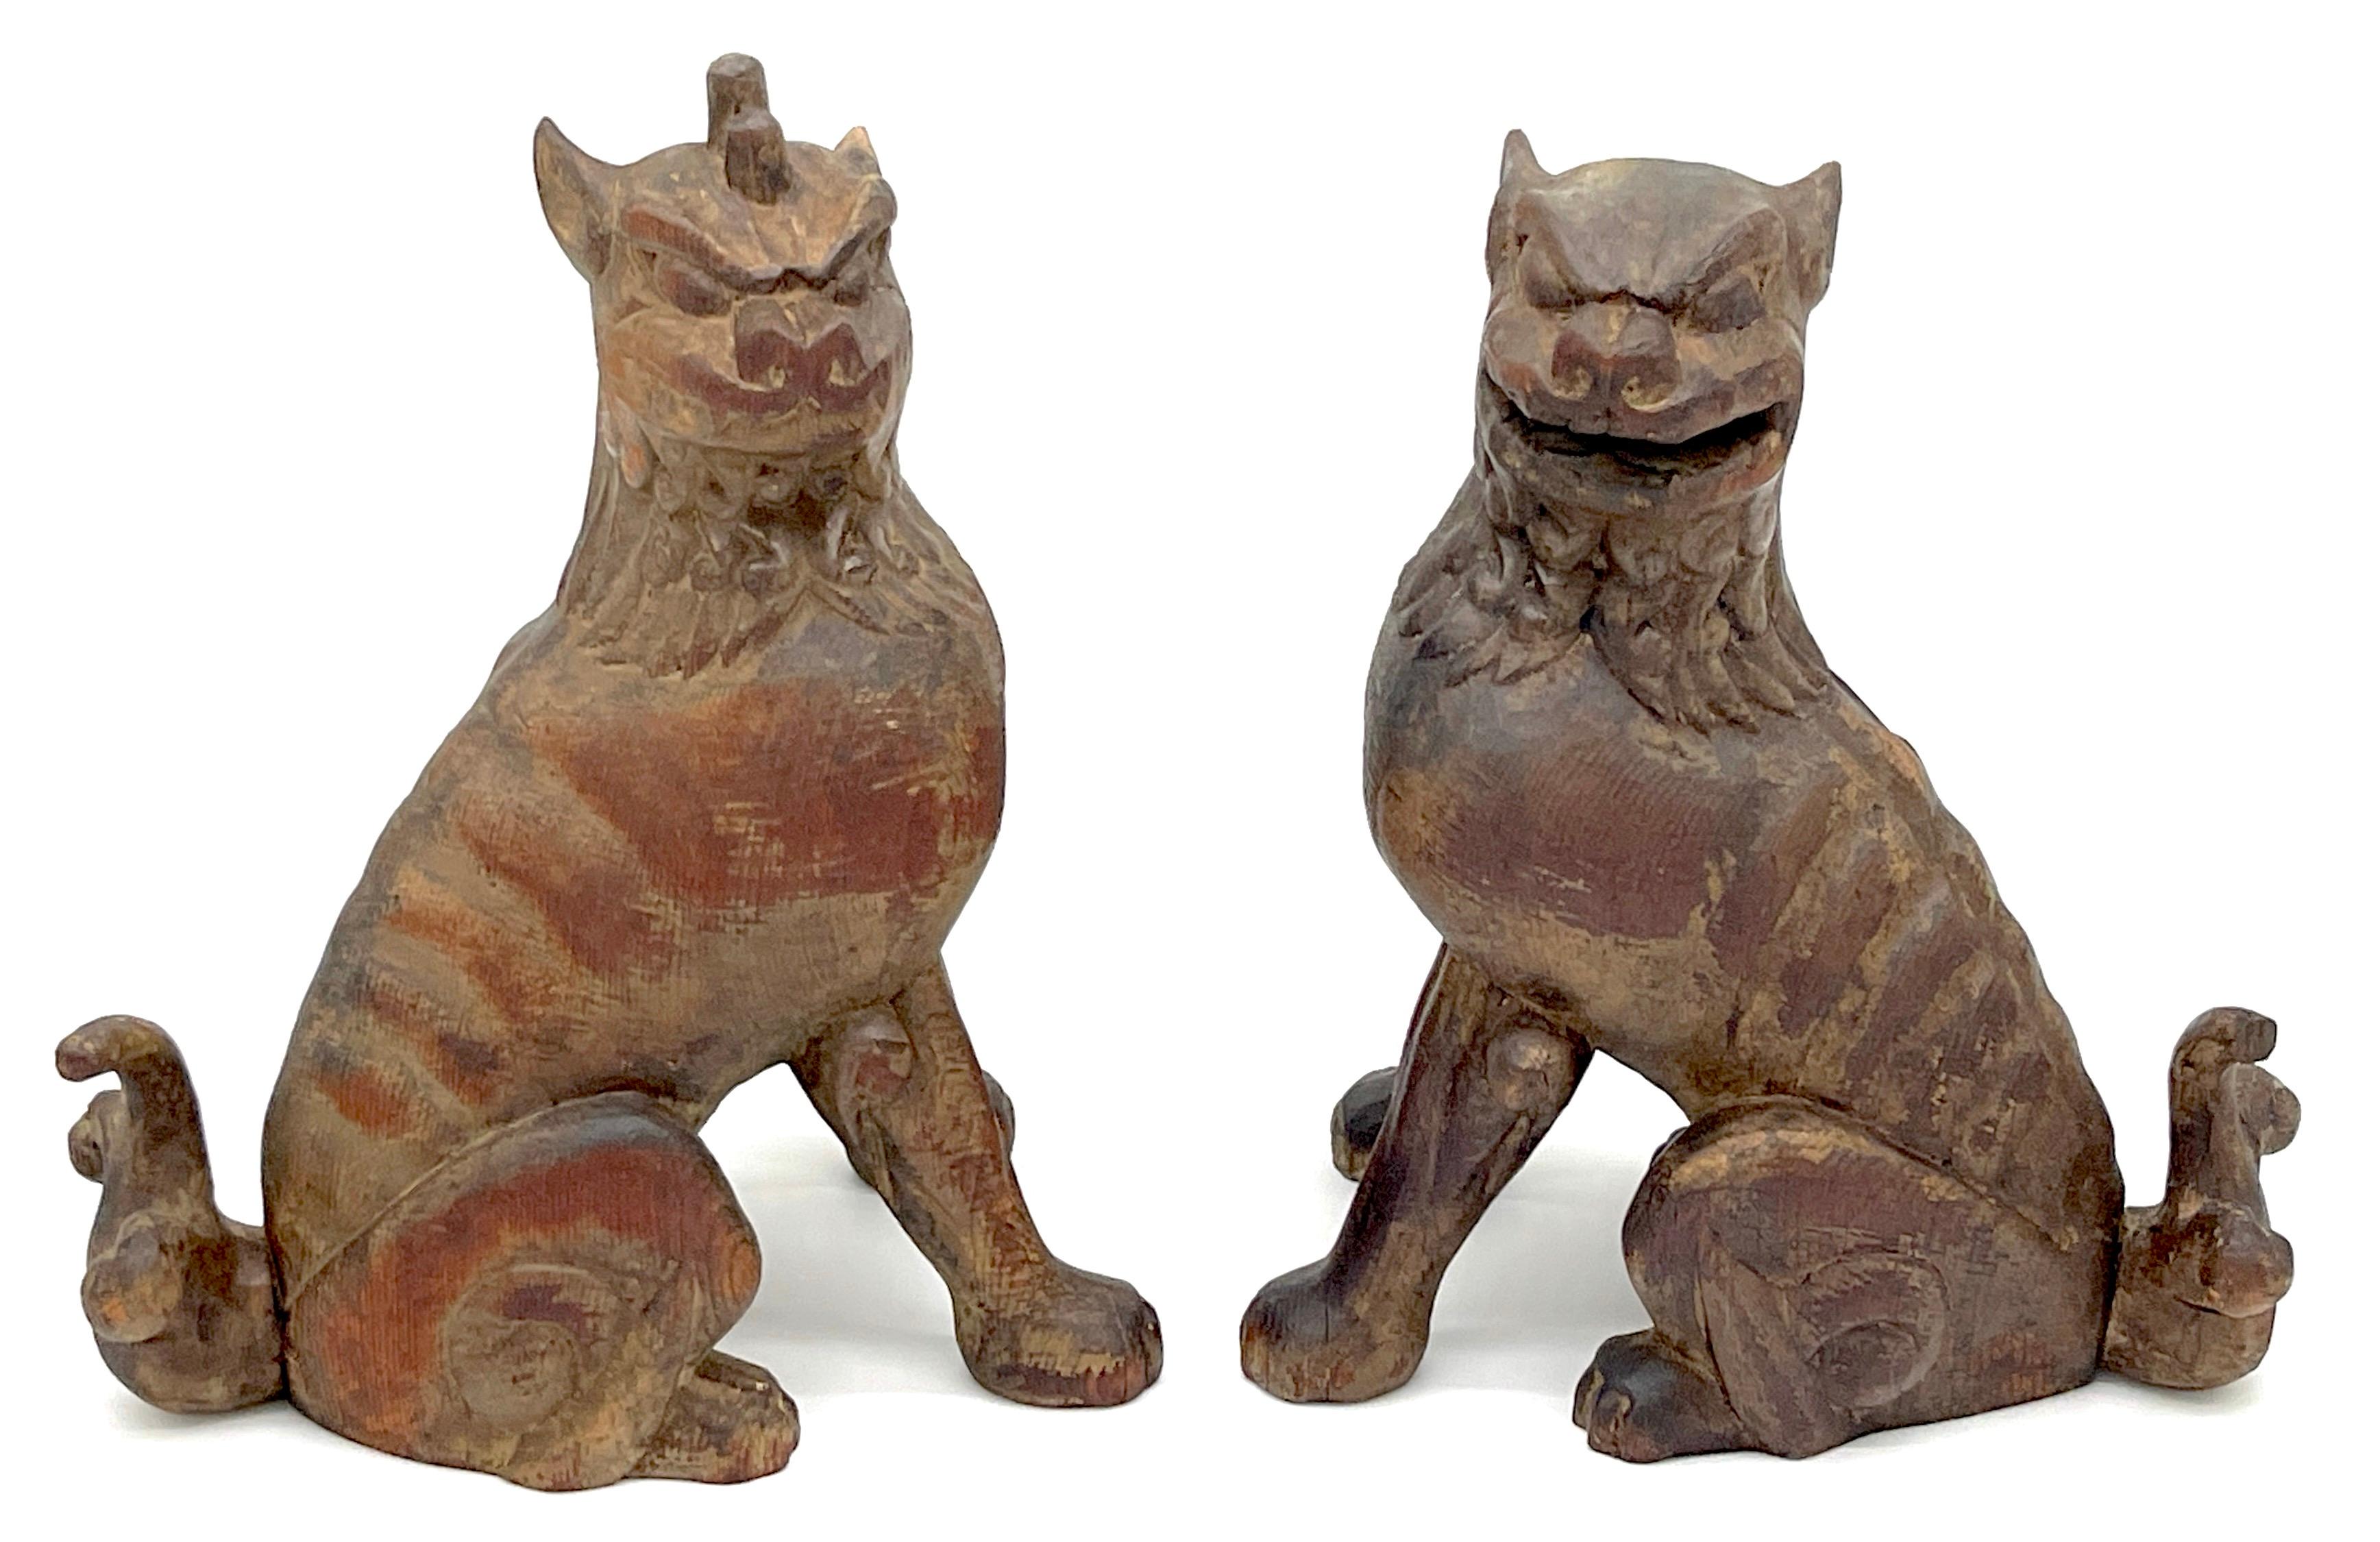 A unique and enchanting pair of 19th Century Tibetan carved wood & polychromed foo/guardian/temple dogs. These mythical Buddhist temple dogs, also known as 